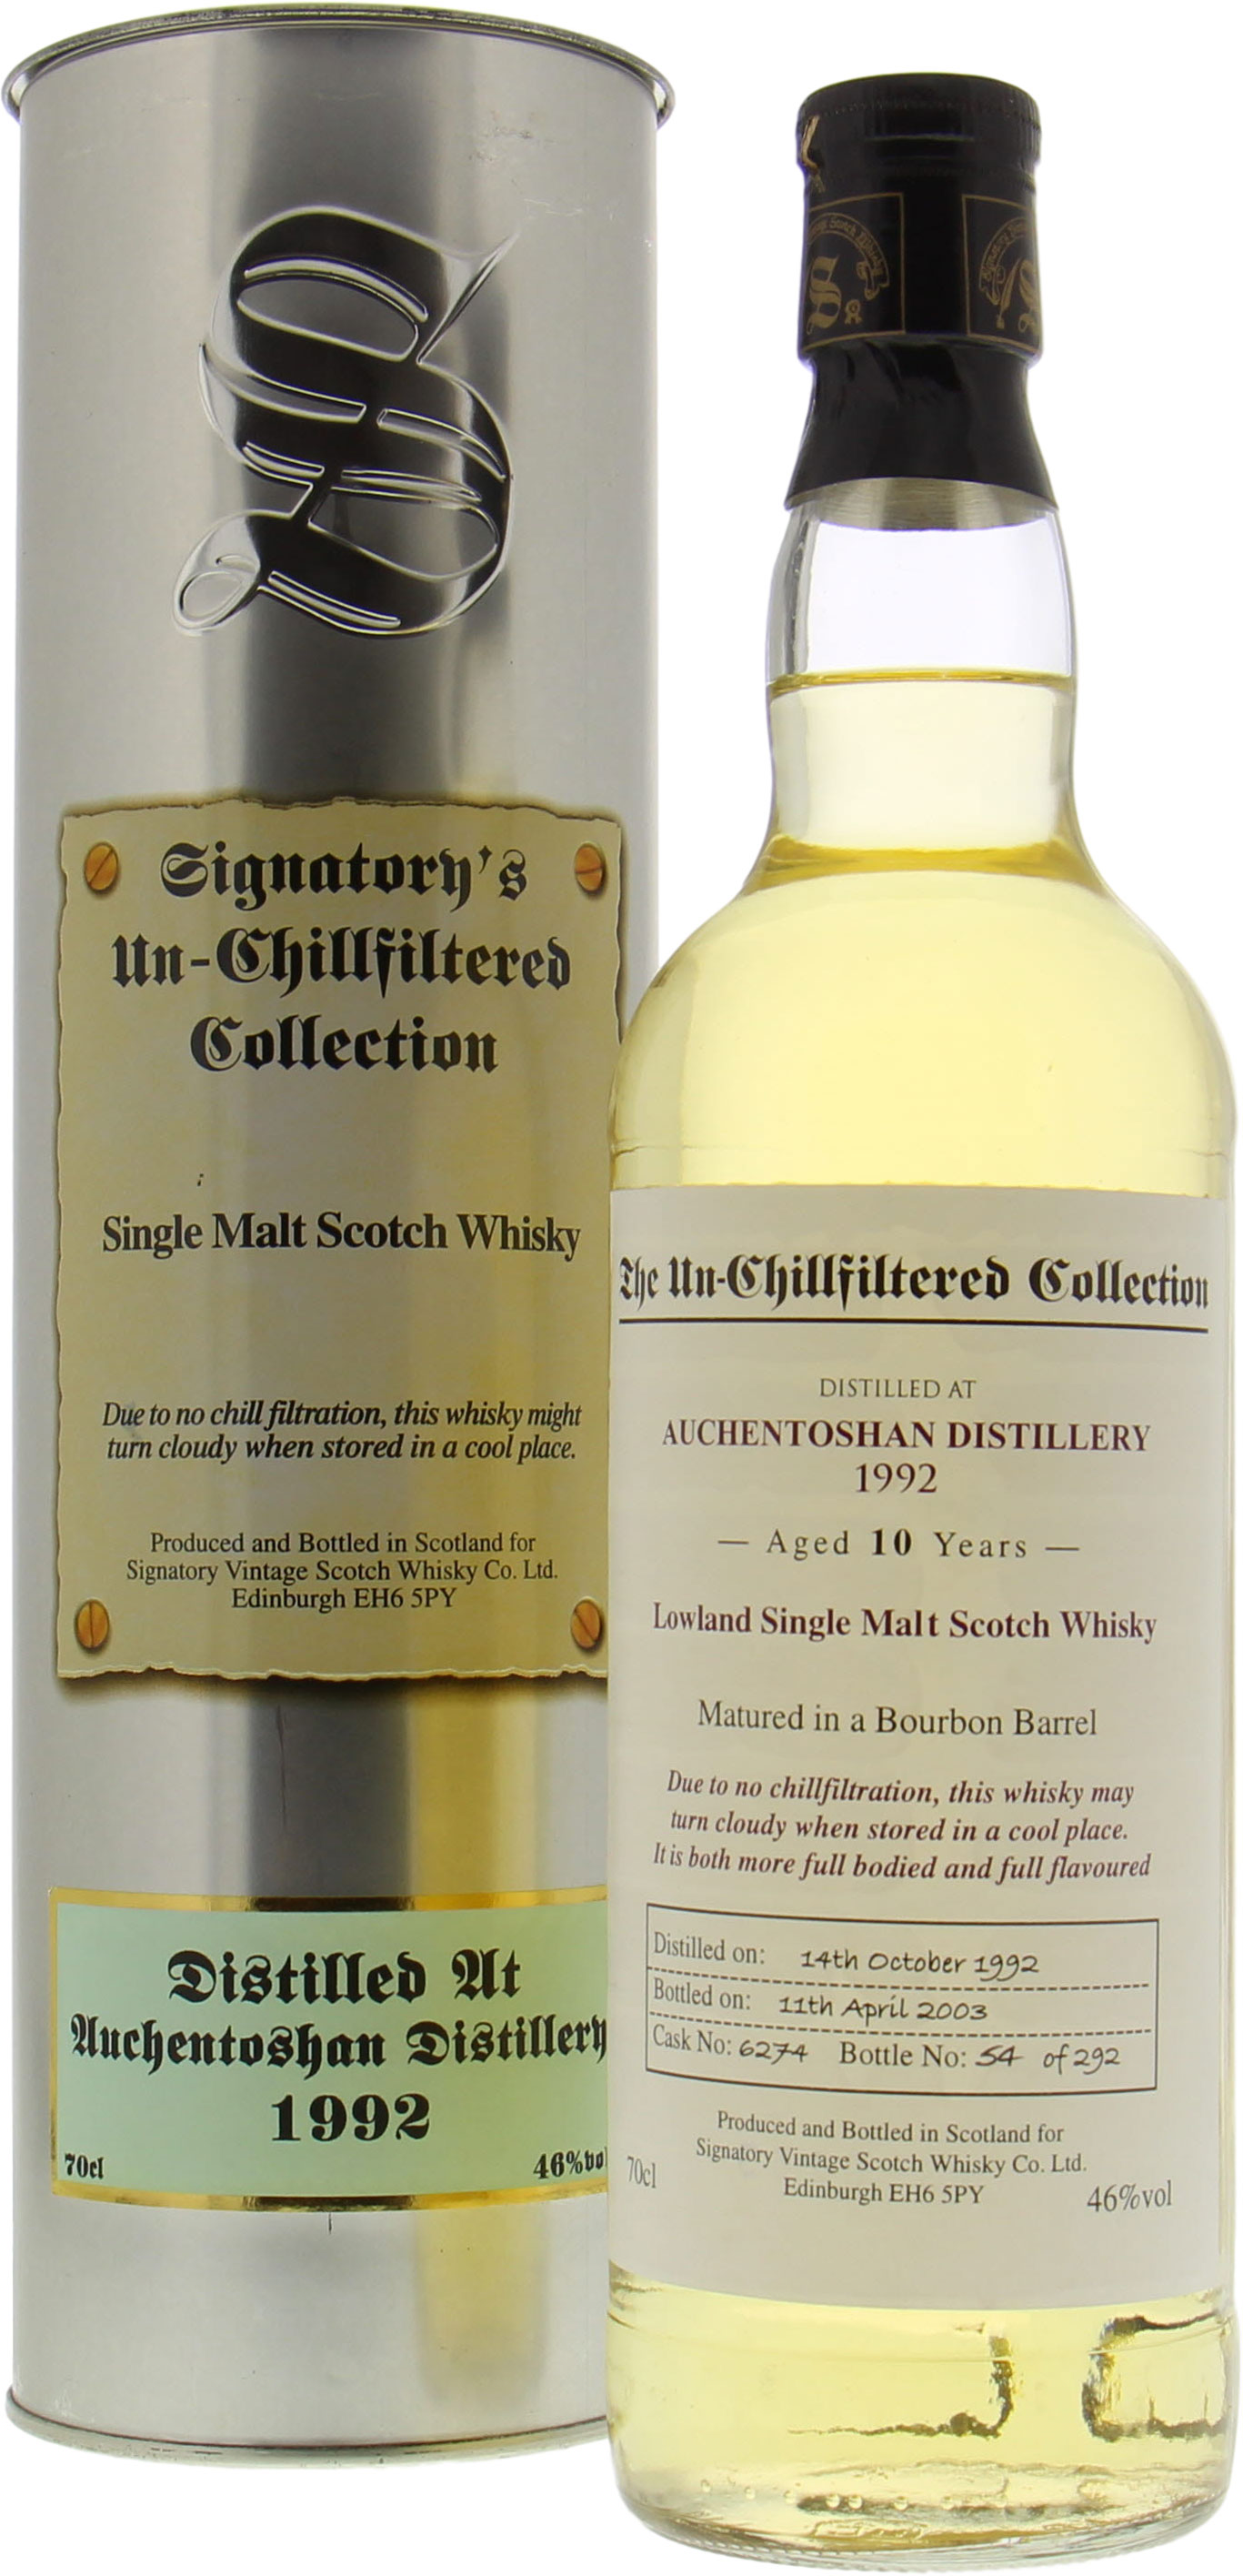 Auchentoshan - 10 Years Old Signatory Un-Chillfiltered Collection 46% 1992 In Original Container